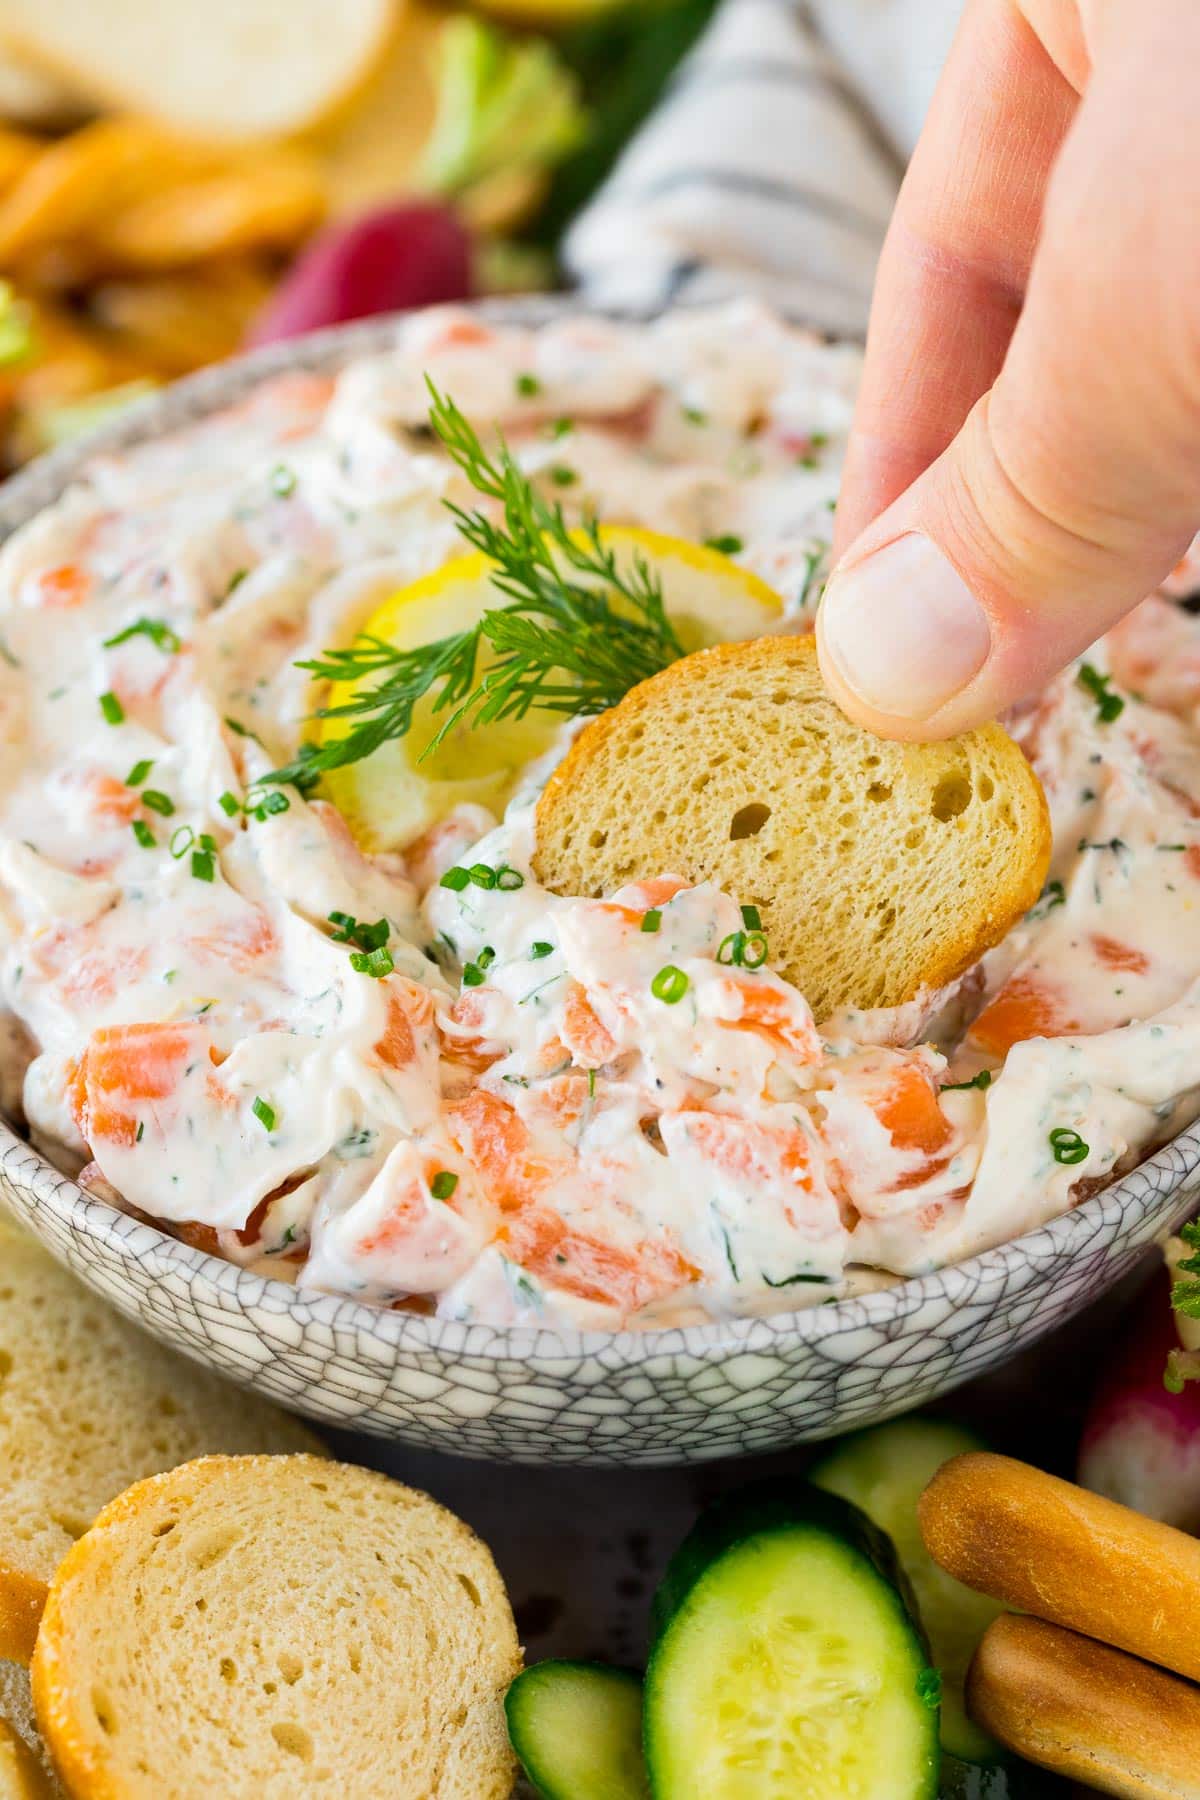 A hand scooping up a portion of salmon dip on a crostini.